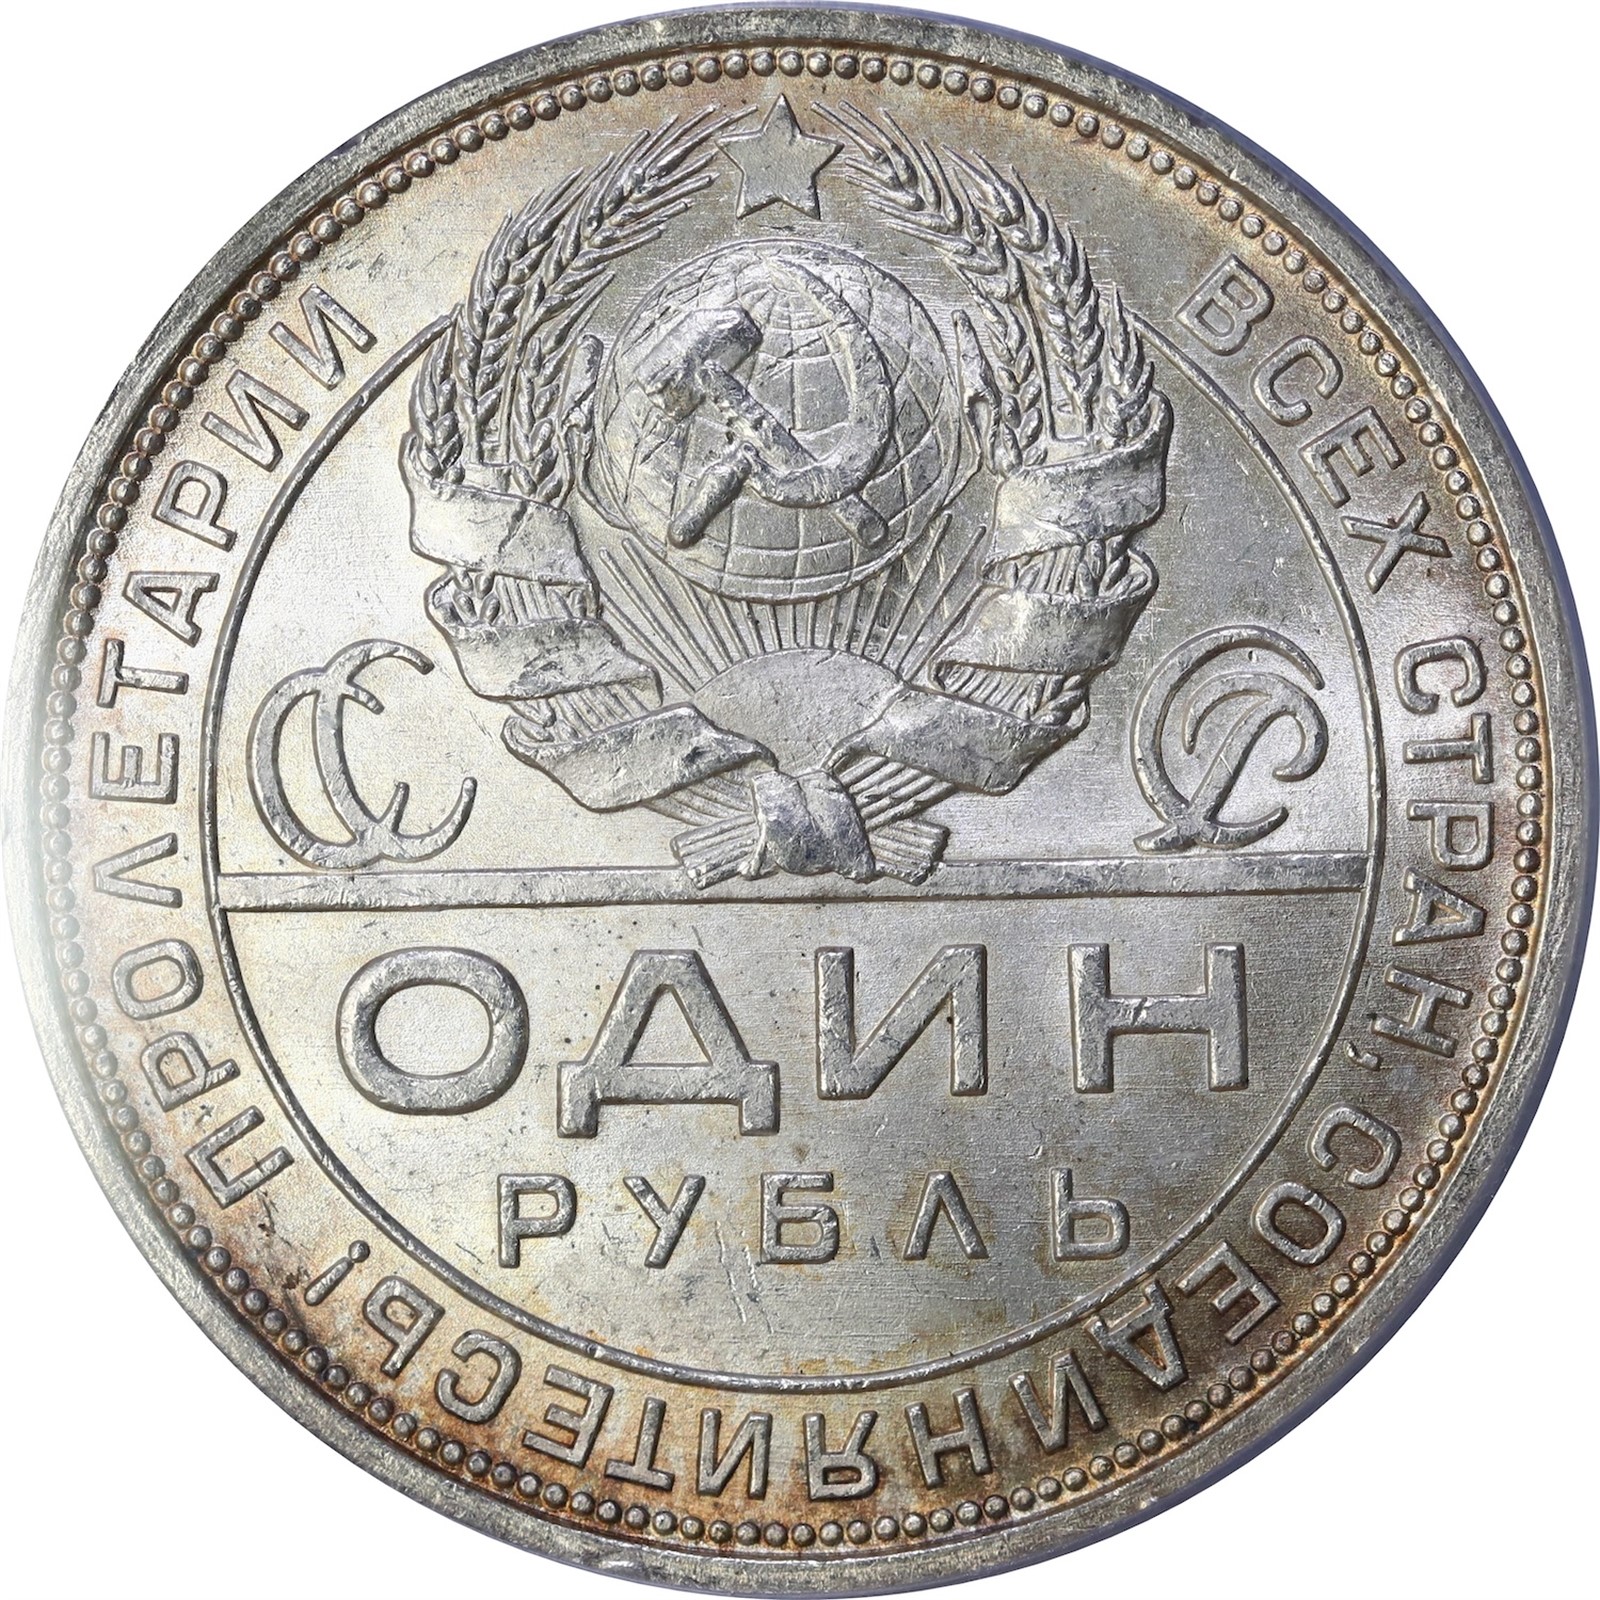 RUSSIA. SOVJET. 1 Rouble 1924 PCGS MS64+